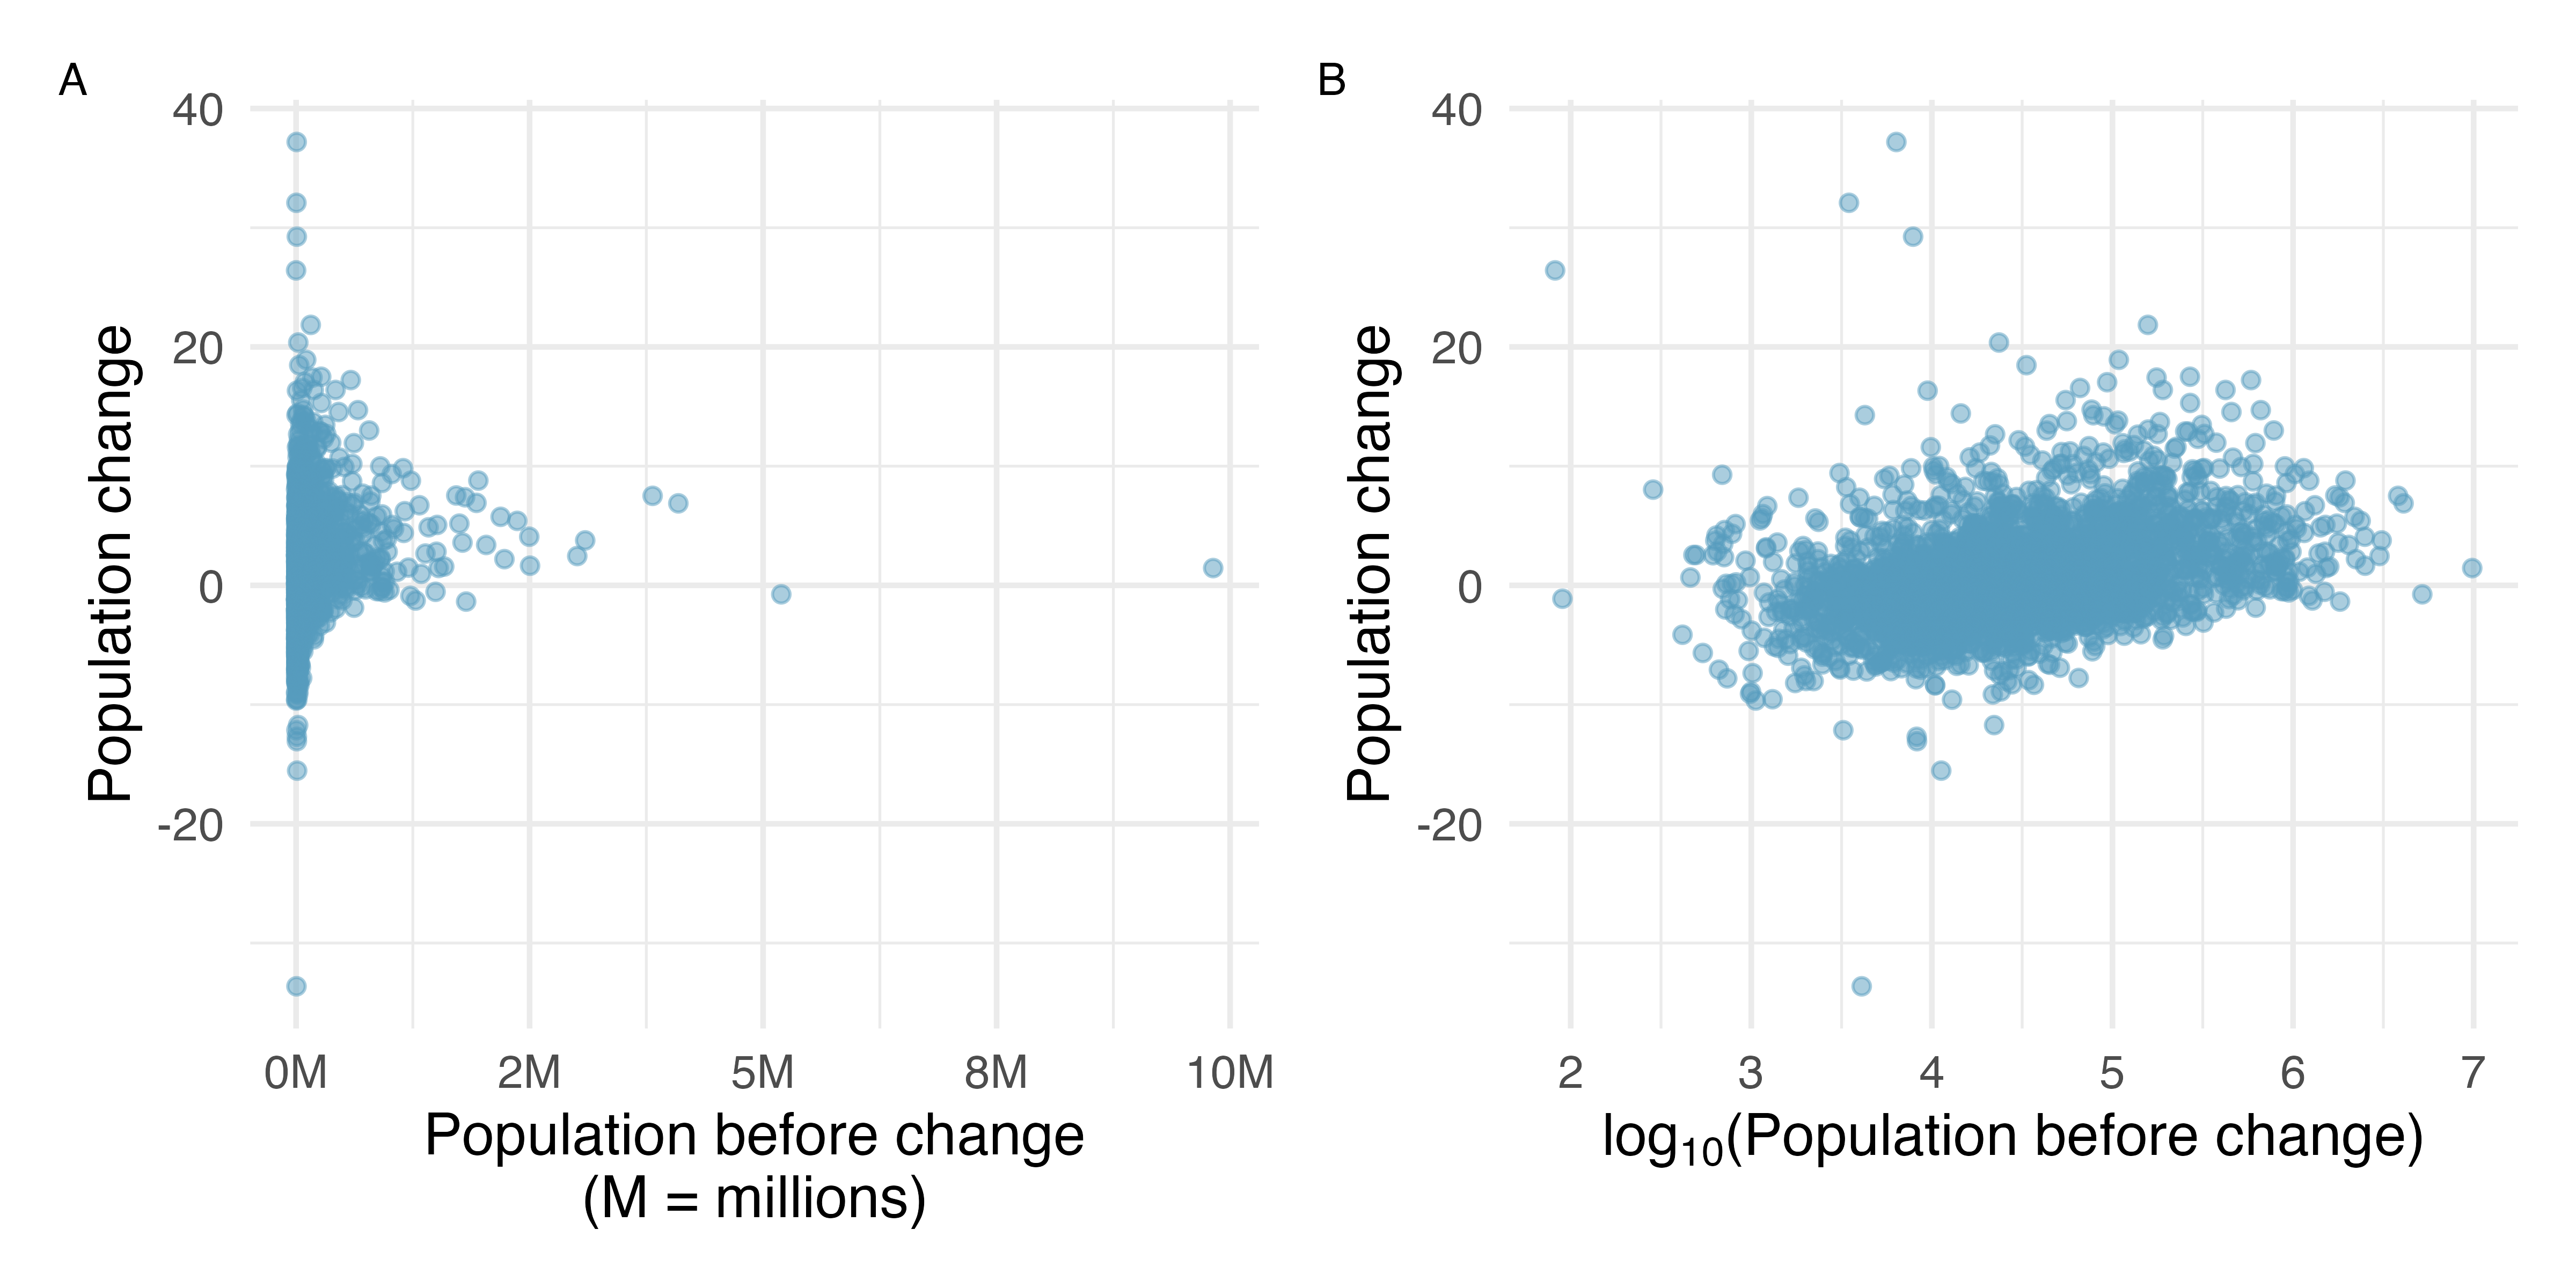 A pair of scatterplots is given.  In both plots the y-axis is population change.  In the first plot, the x-axis is given by the raw variable population before change, and most of the points are quite small, obscuring any  x-y relationship.  In the second plot, the x-axis is given by the transformed variable log-10 of the population before change.  The relationship between log-10 population before change and population change is seen to be moderately strong, positive, and linear.